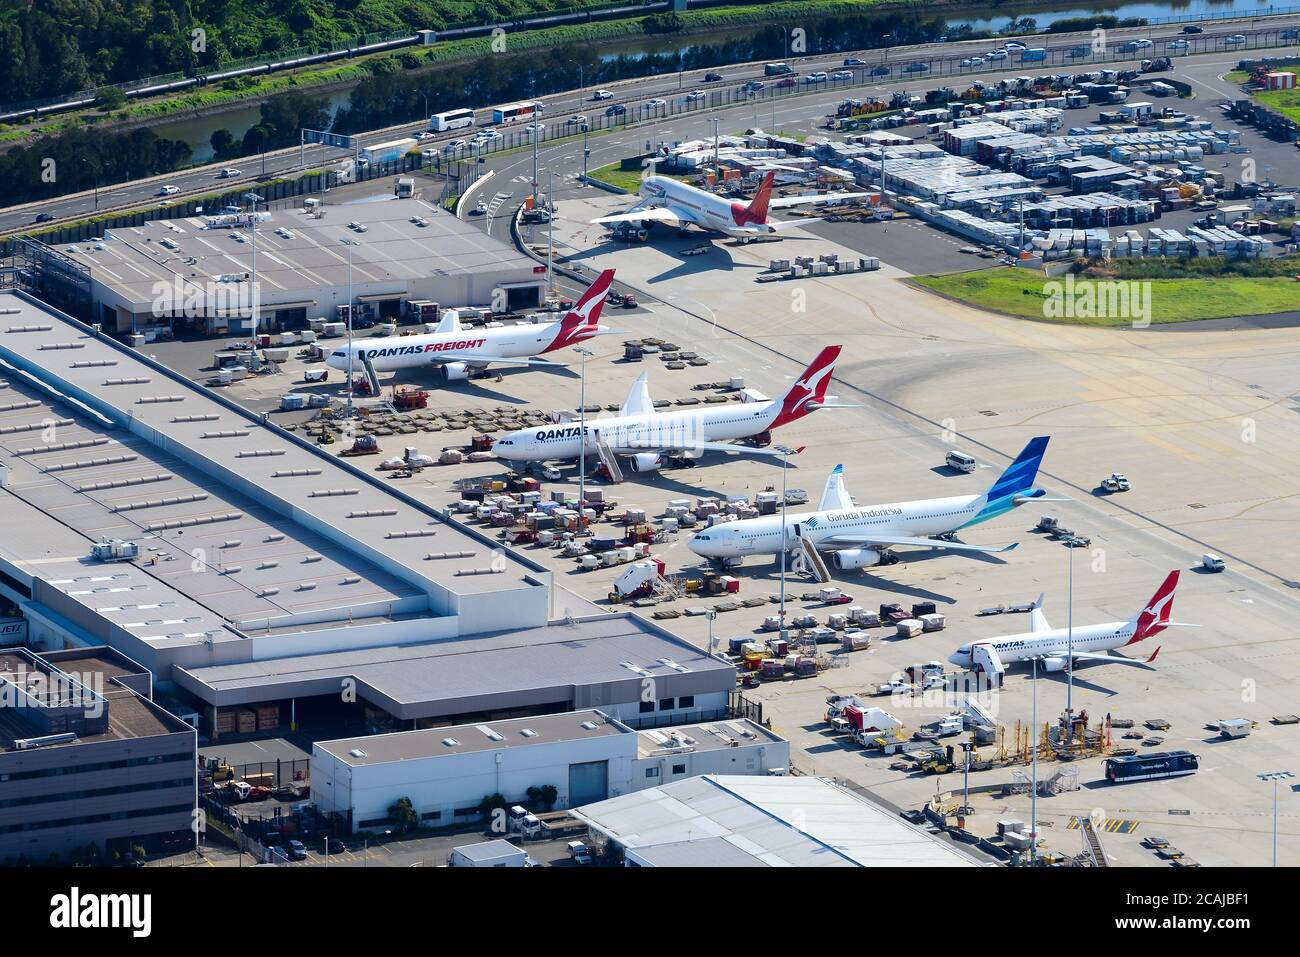 Cargo ramp at Sydney International Airport in Australia. Qantas Airways aircraft at remote stand with multiple cargo pallets around. Freighters area. Stock Photo